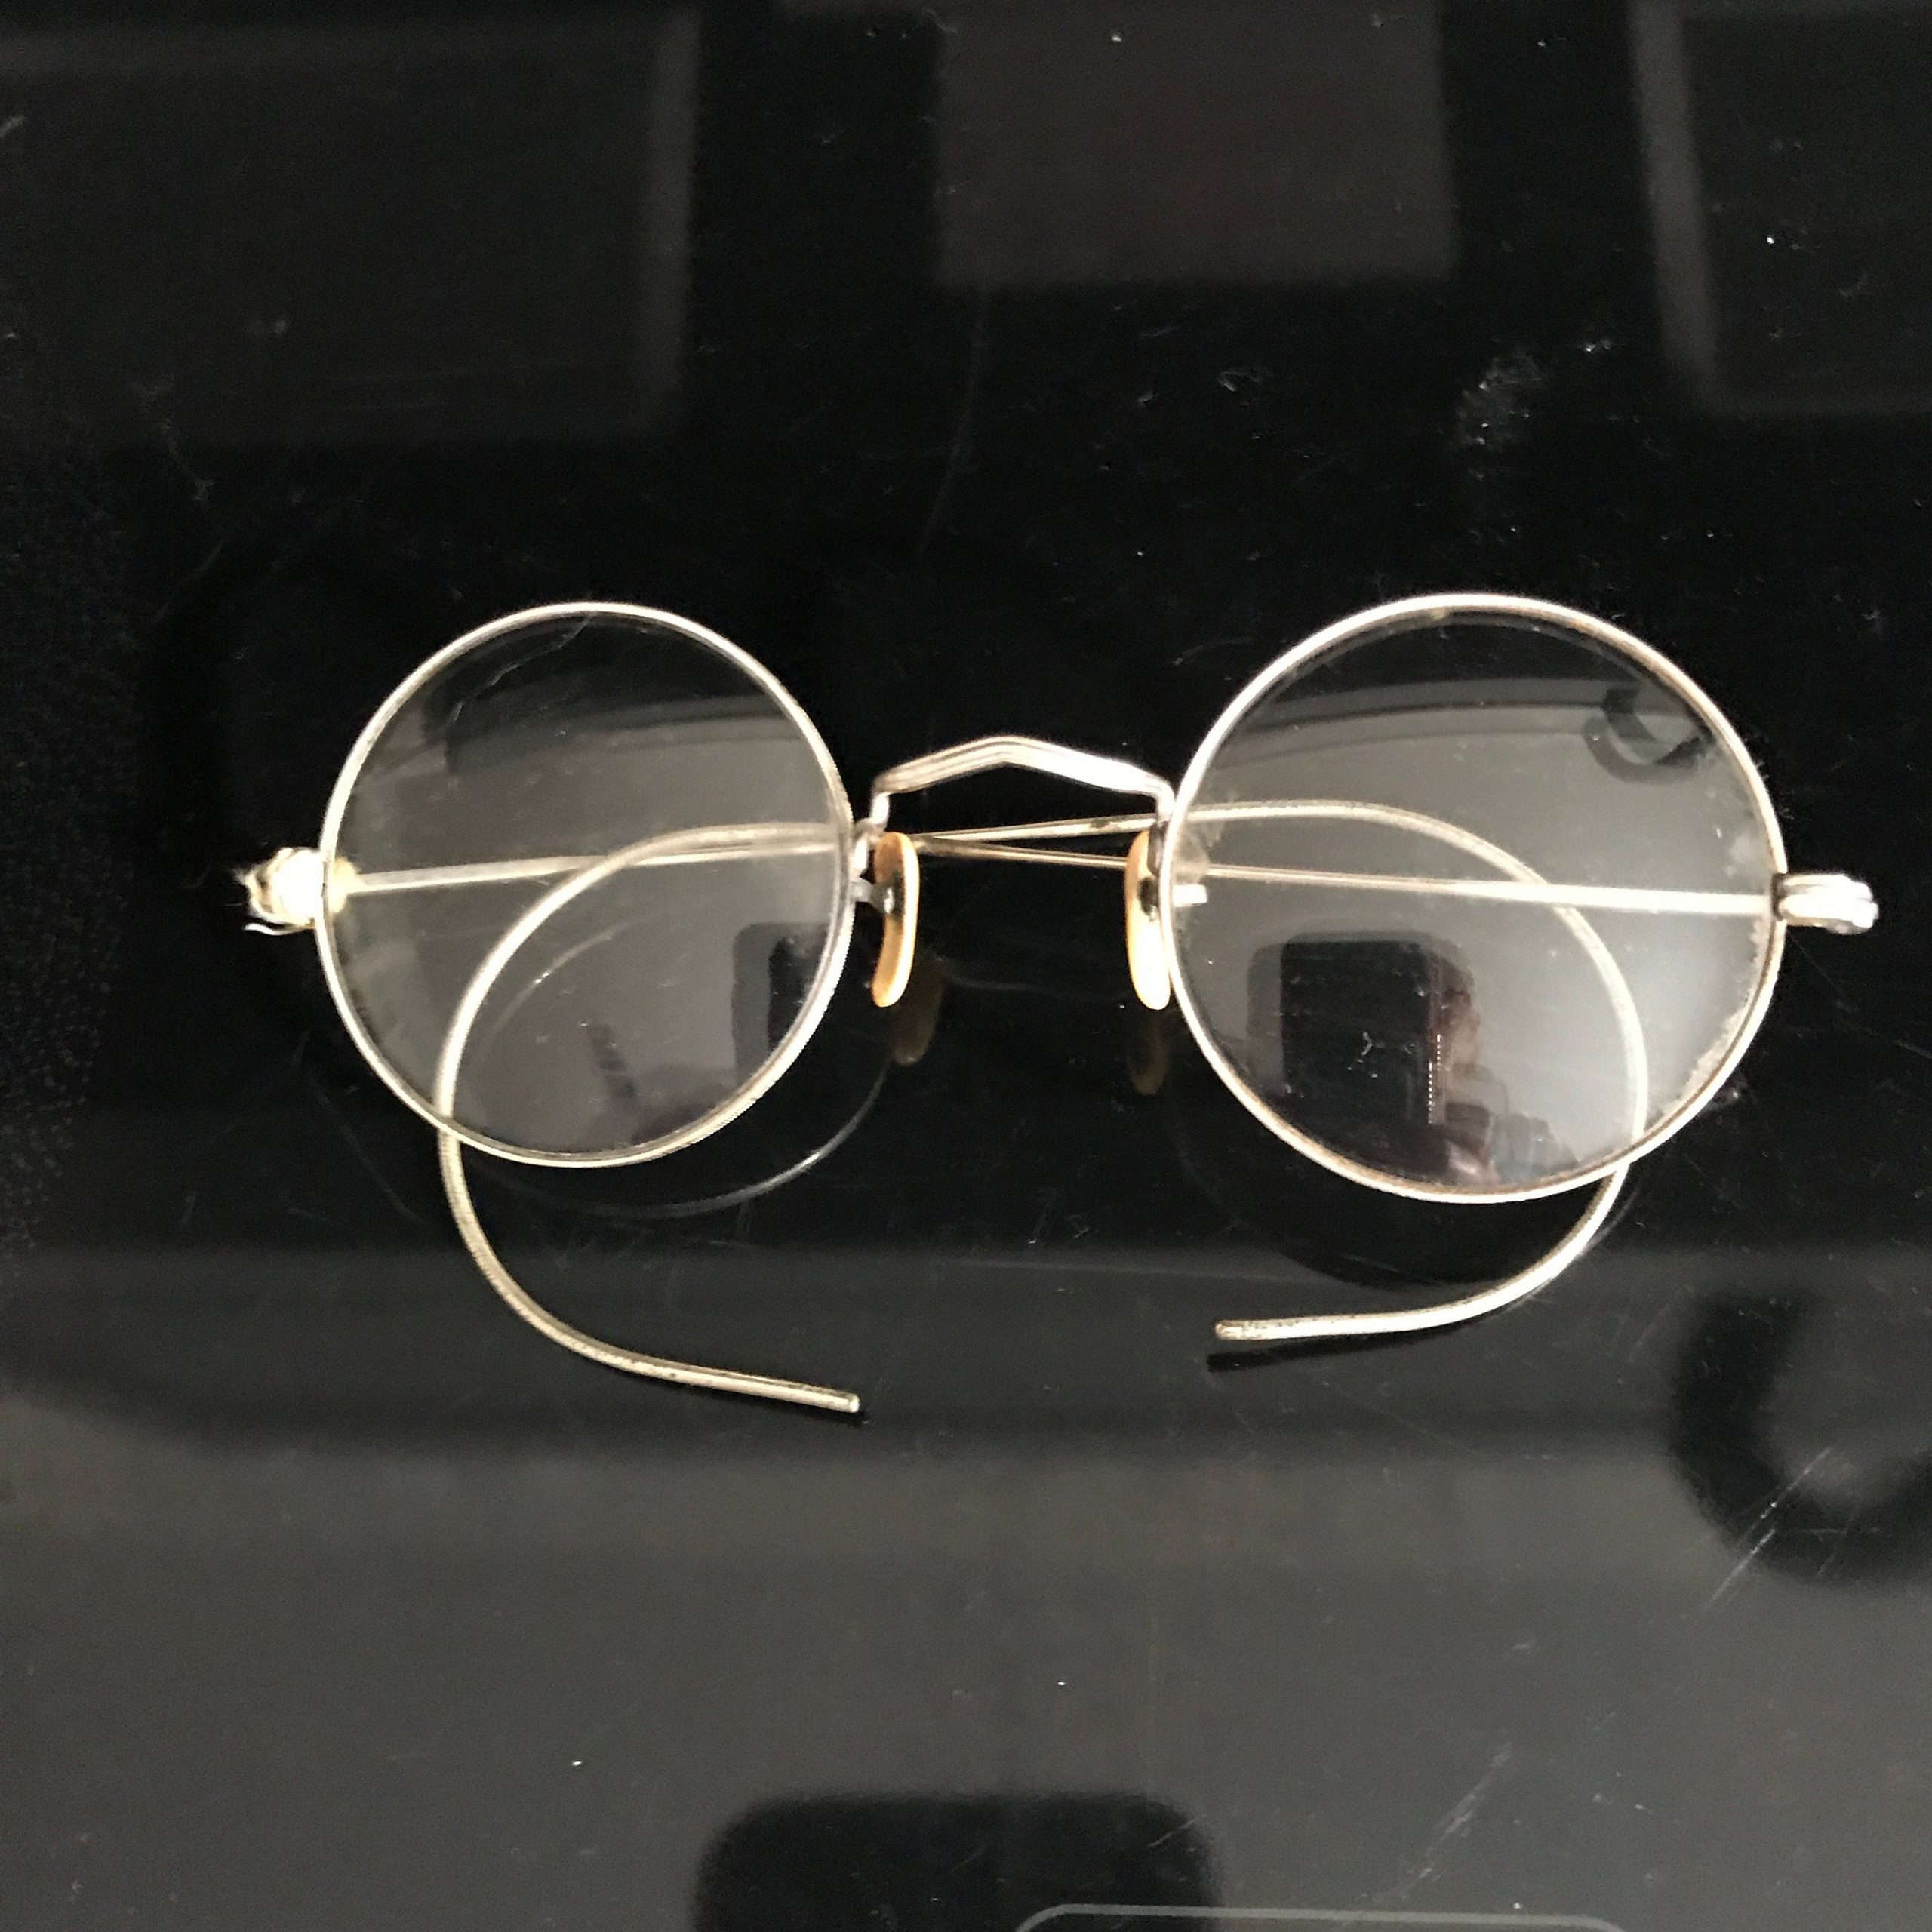 Antique eyeglasses silver wire rim collectible display farmhouse office ...